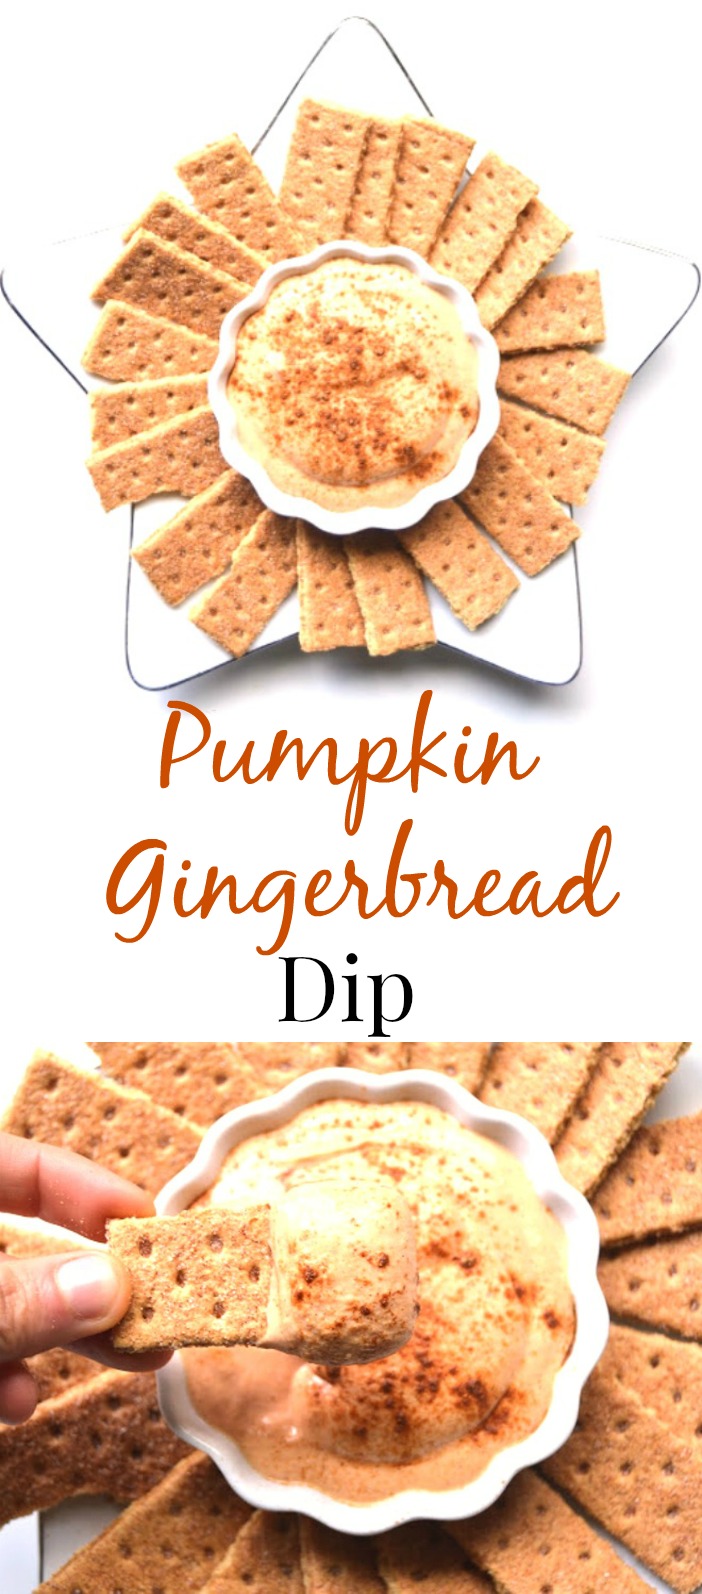 This pumpkin gingerbread dip is perfect for a snack or dessert and is healthier than your typical dip with the addition of pumpkin and Greek yogurt! www.nutritionistreviews.com